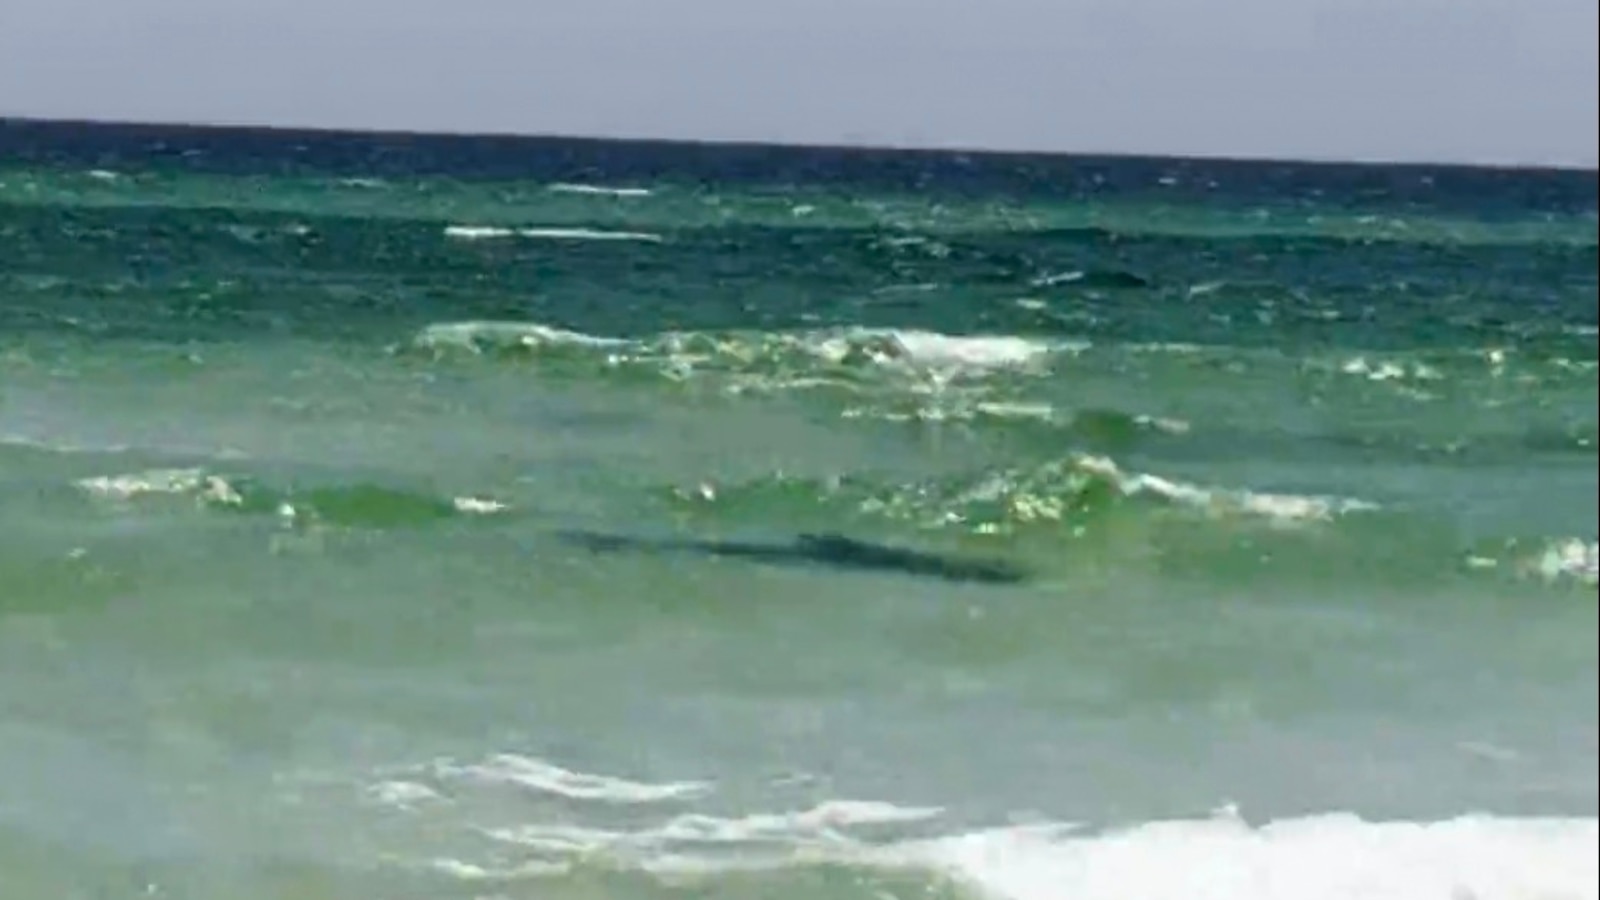 3 swimmers attacked by sharks off Florida panhandle